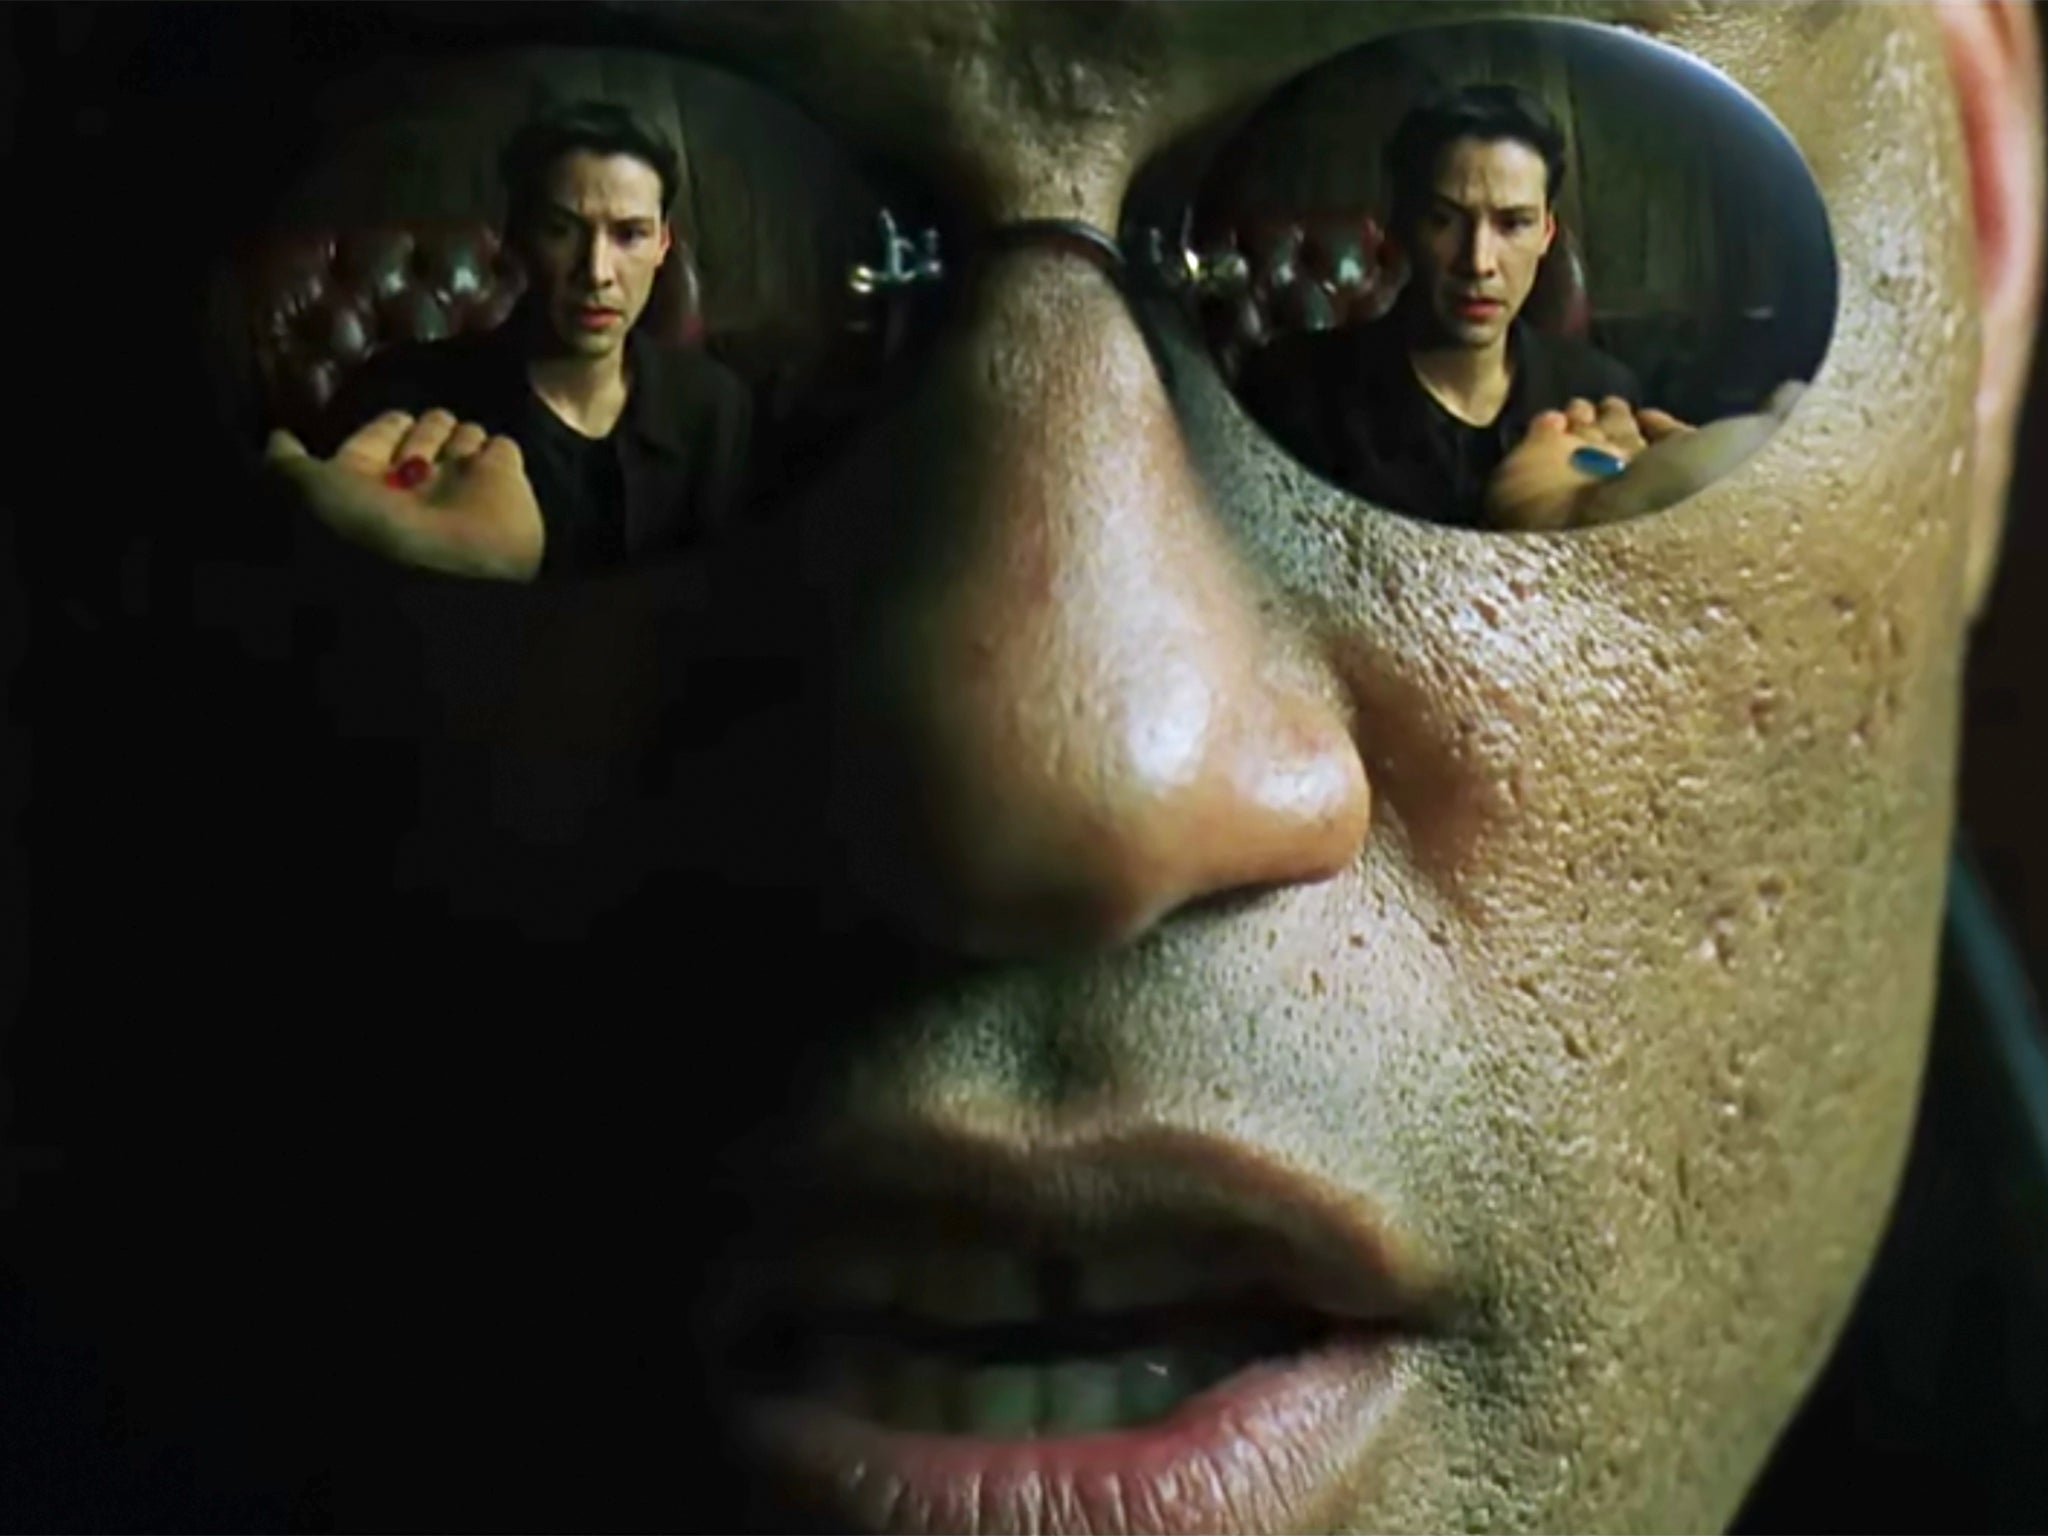 Neo (Keanu Reeves) is offered a red pill or a blue pill by Morpheus (Laurence Fishburne) in ‘The Matrix’